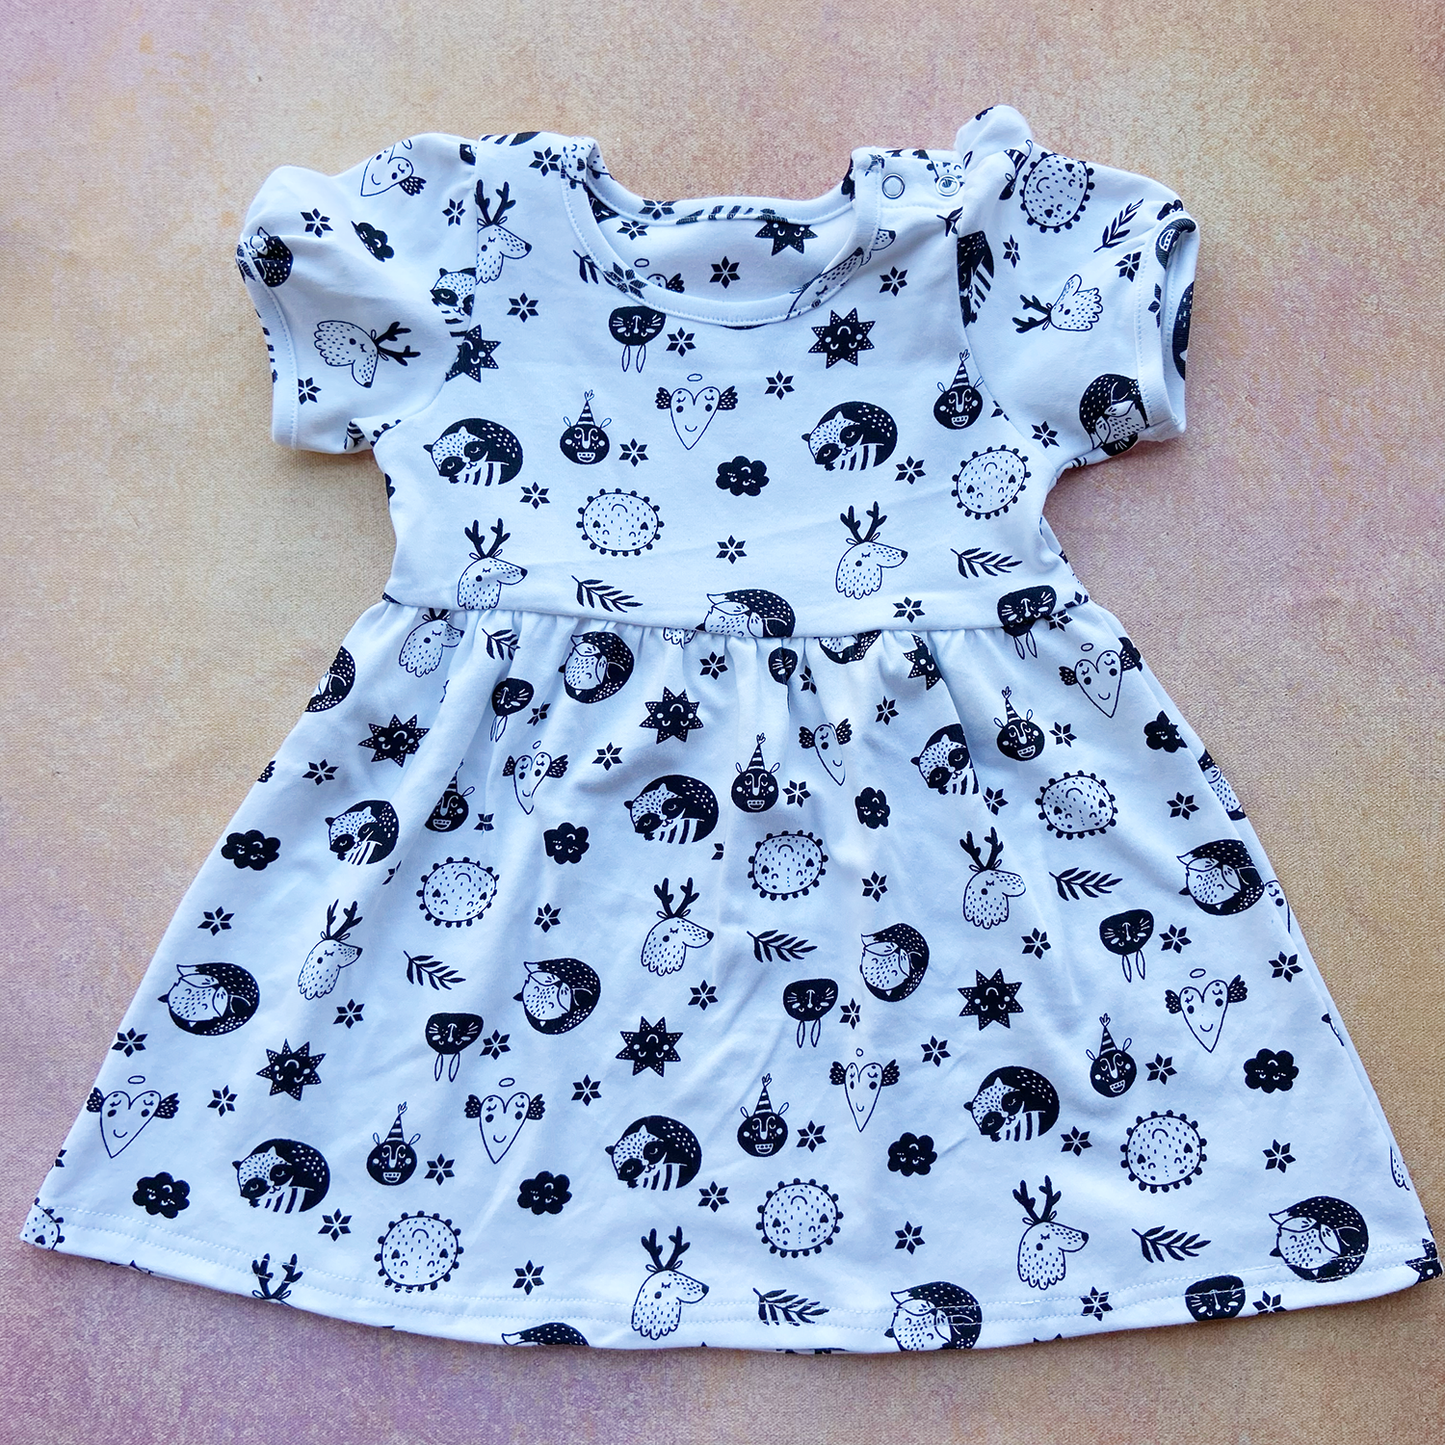 Baby Frock - Size 2-3 YRS (Choose Print)